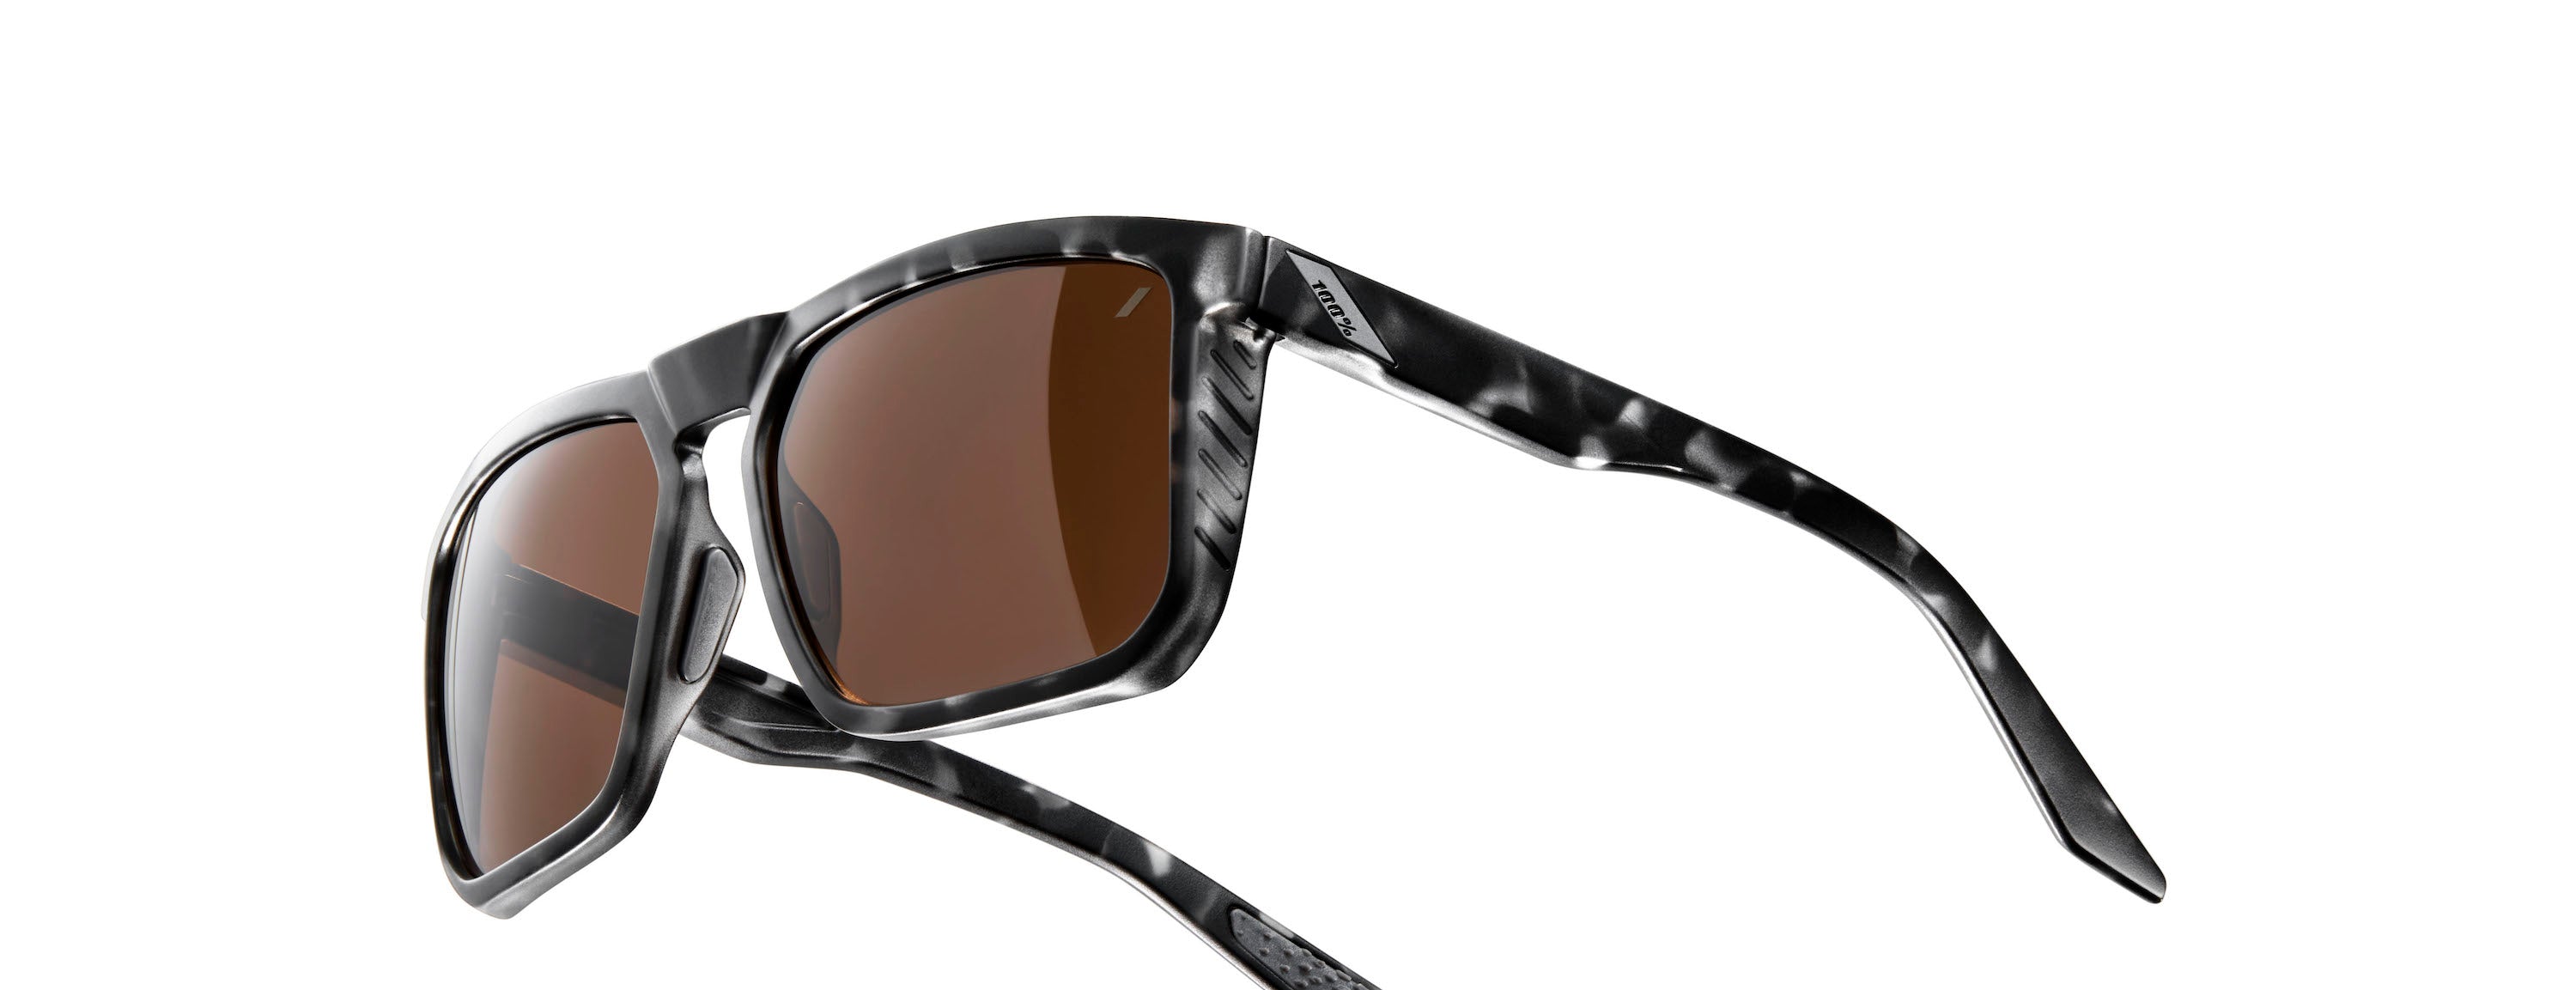 Selecting the Perfect Active Performance Eyewear for Your Loved Ones